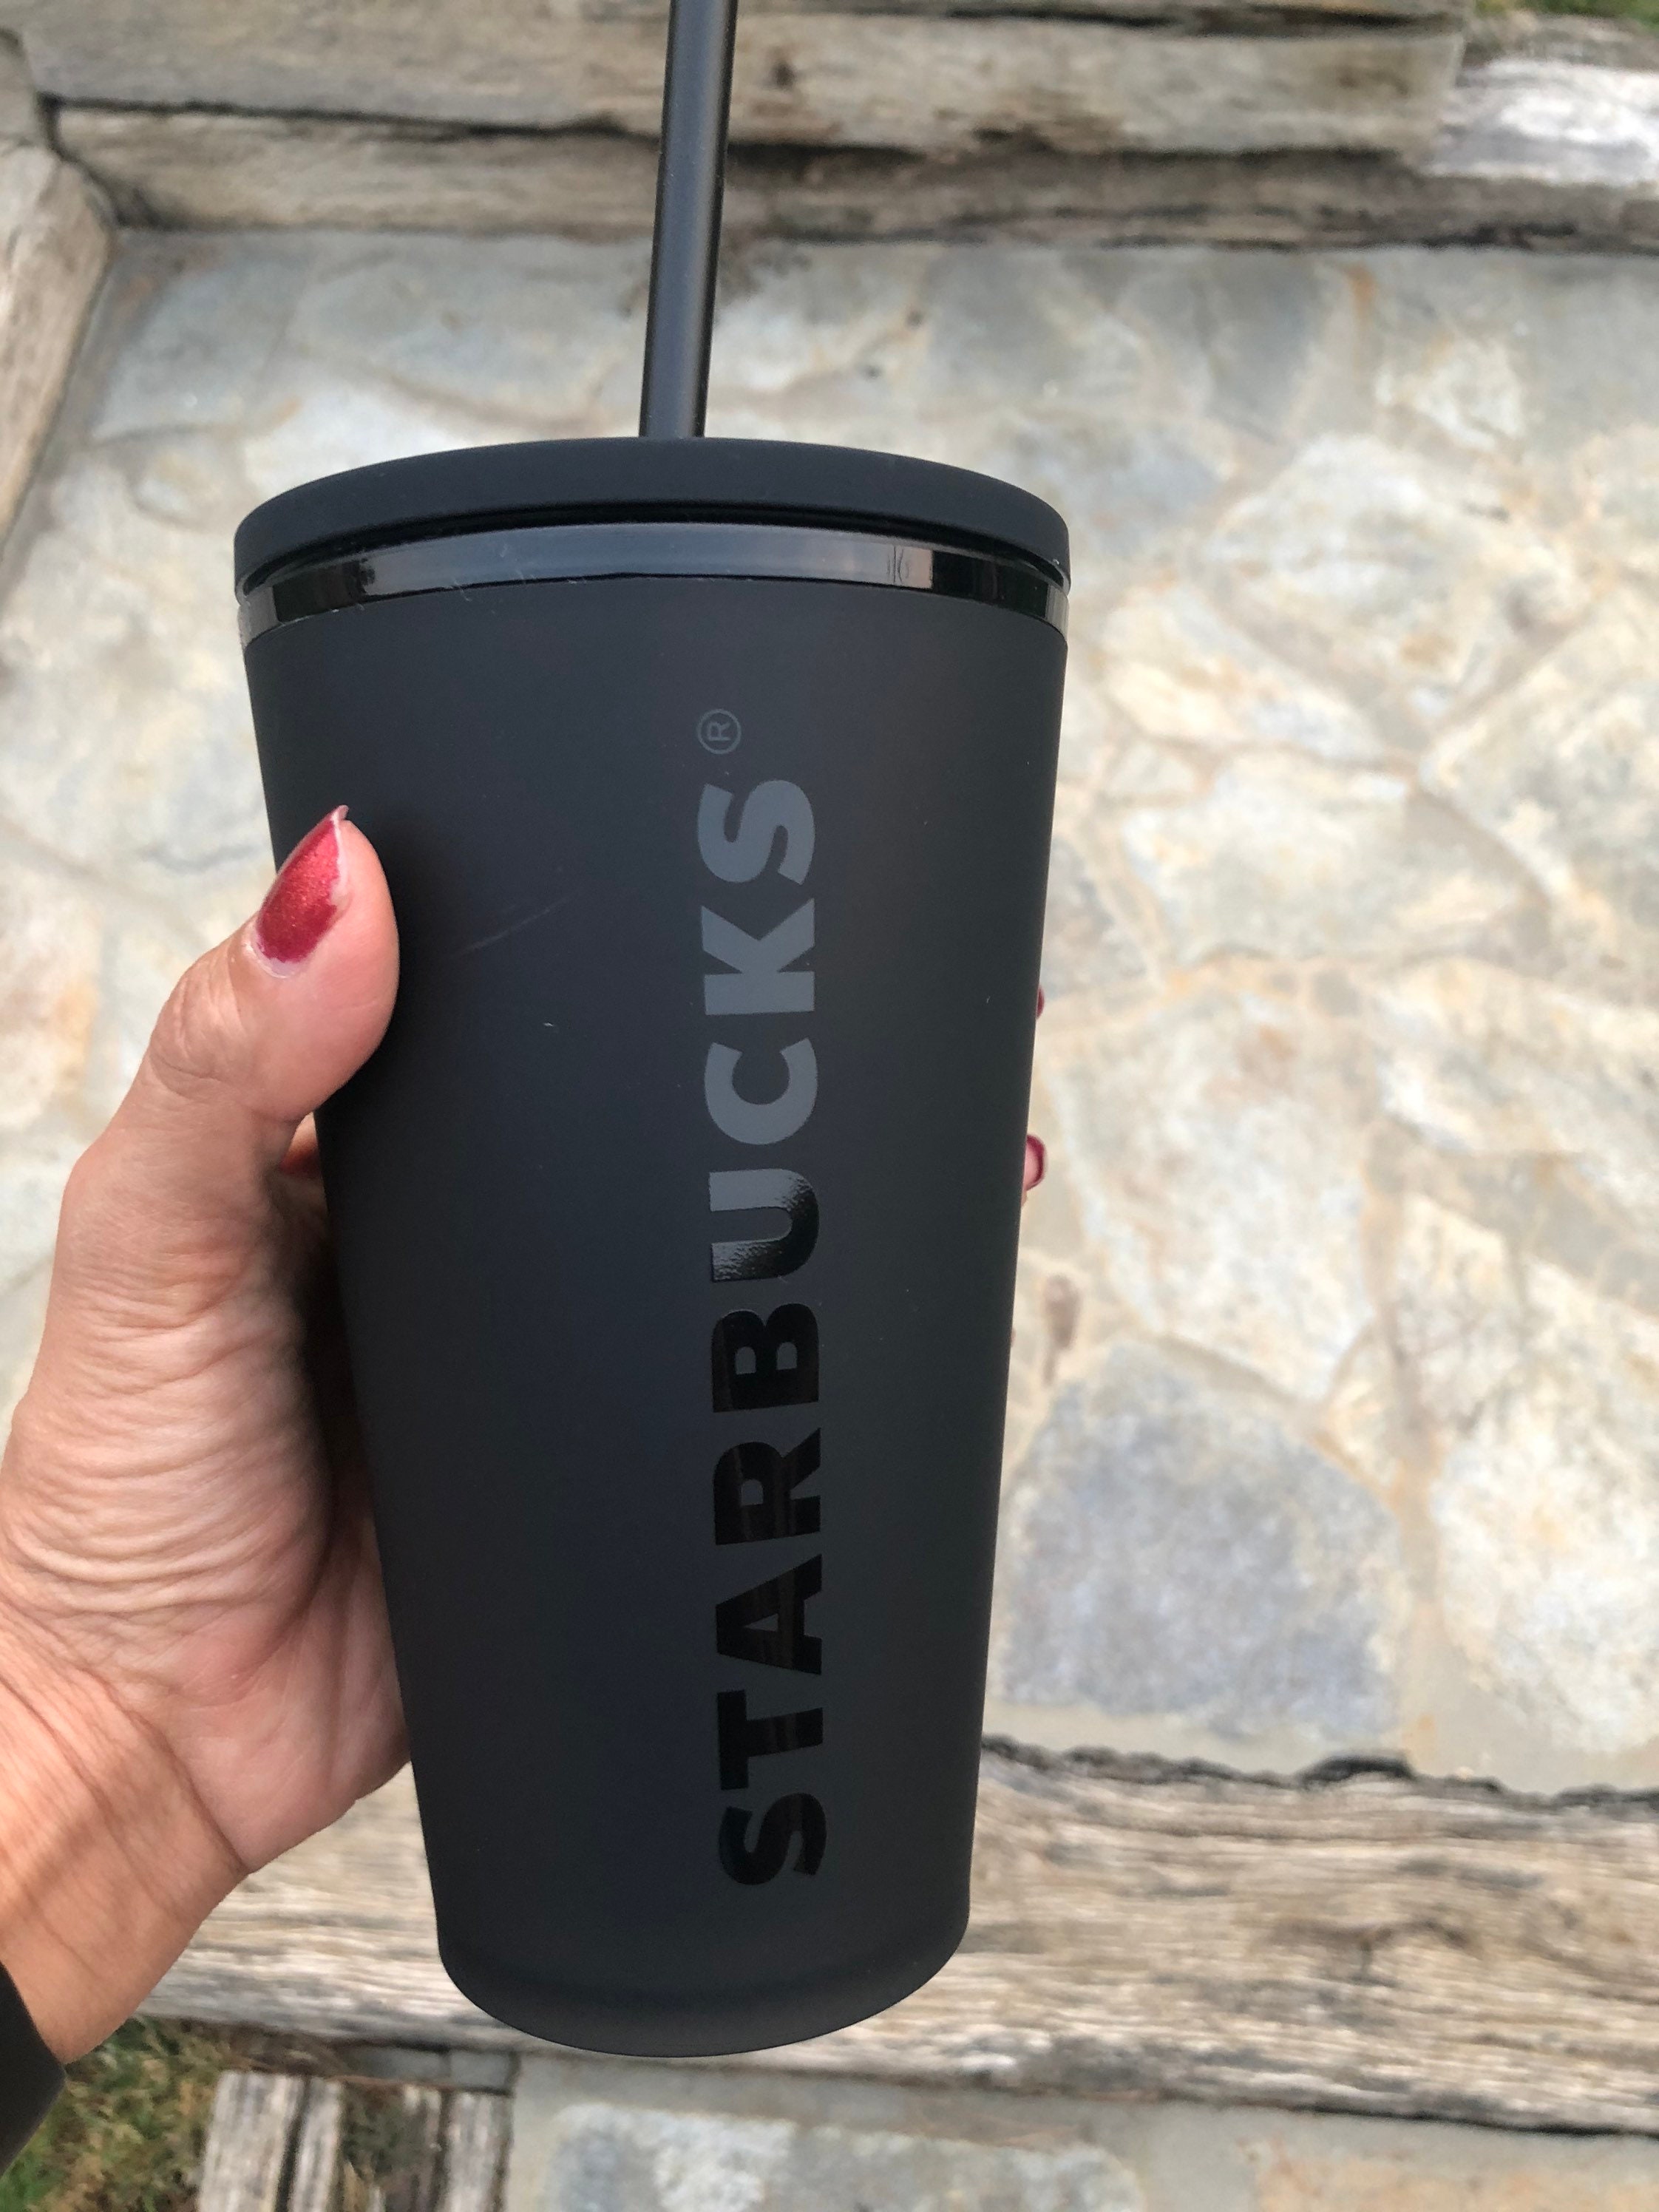 Manacreations21 - Chanel Starbucks cold cup